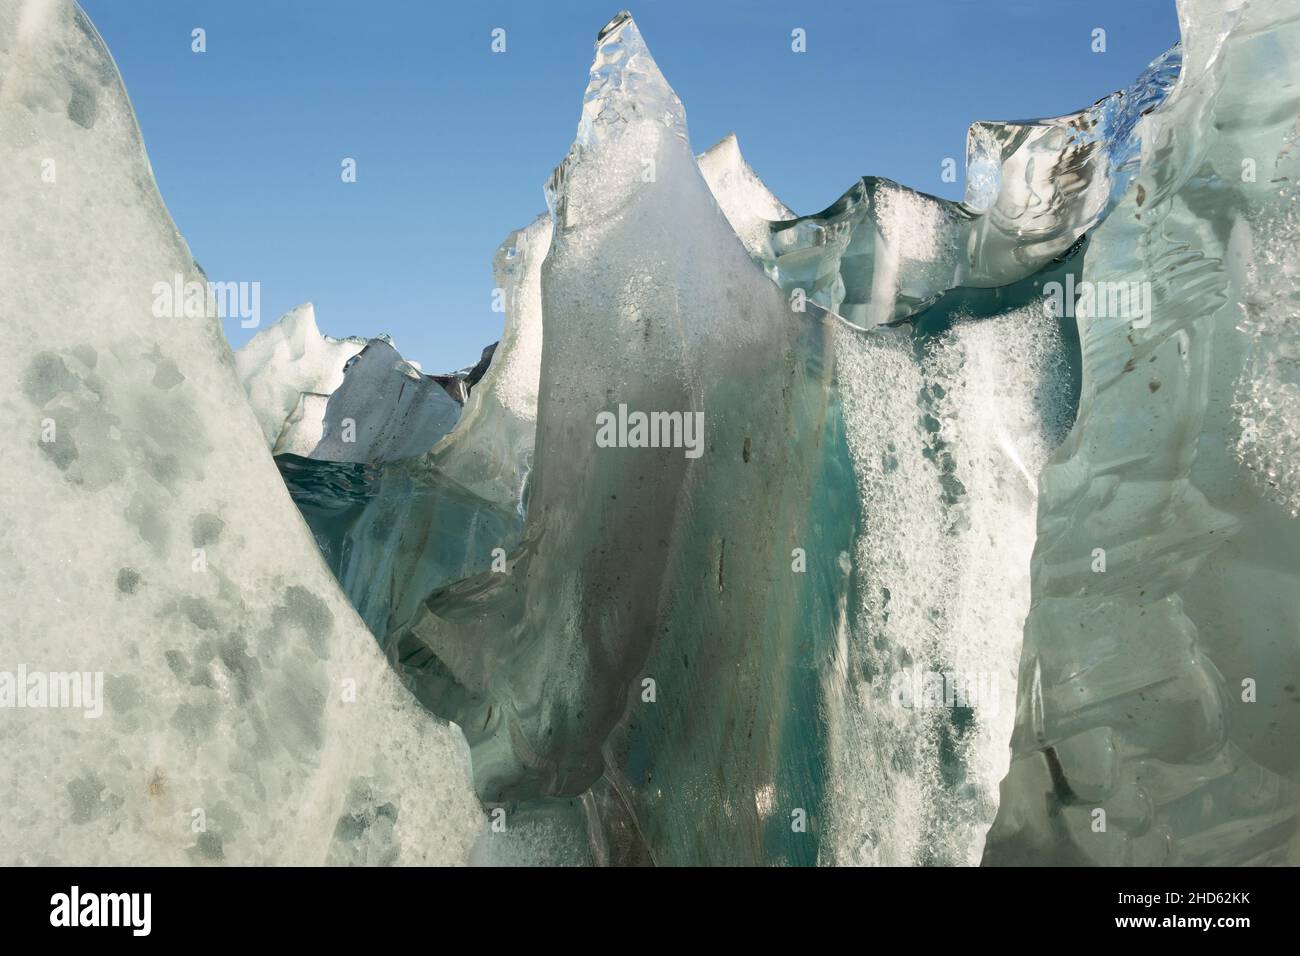 Iceberg with different types of ice, Rodefjord, Scoresby Sund, Greenland Stock Photo